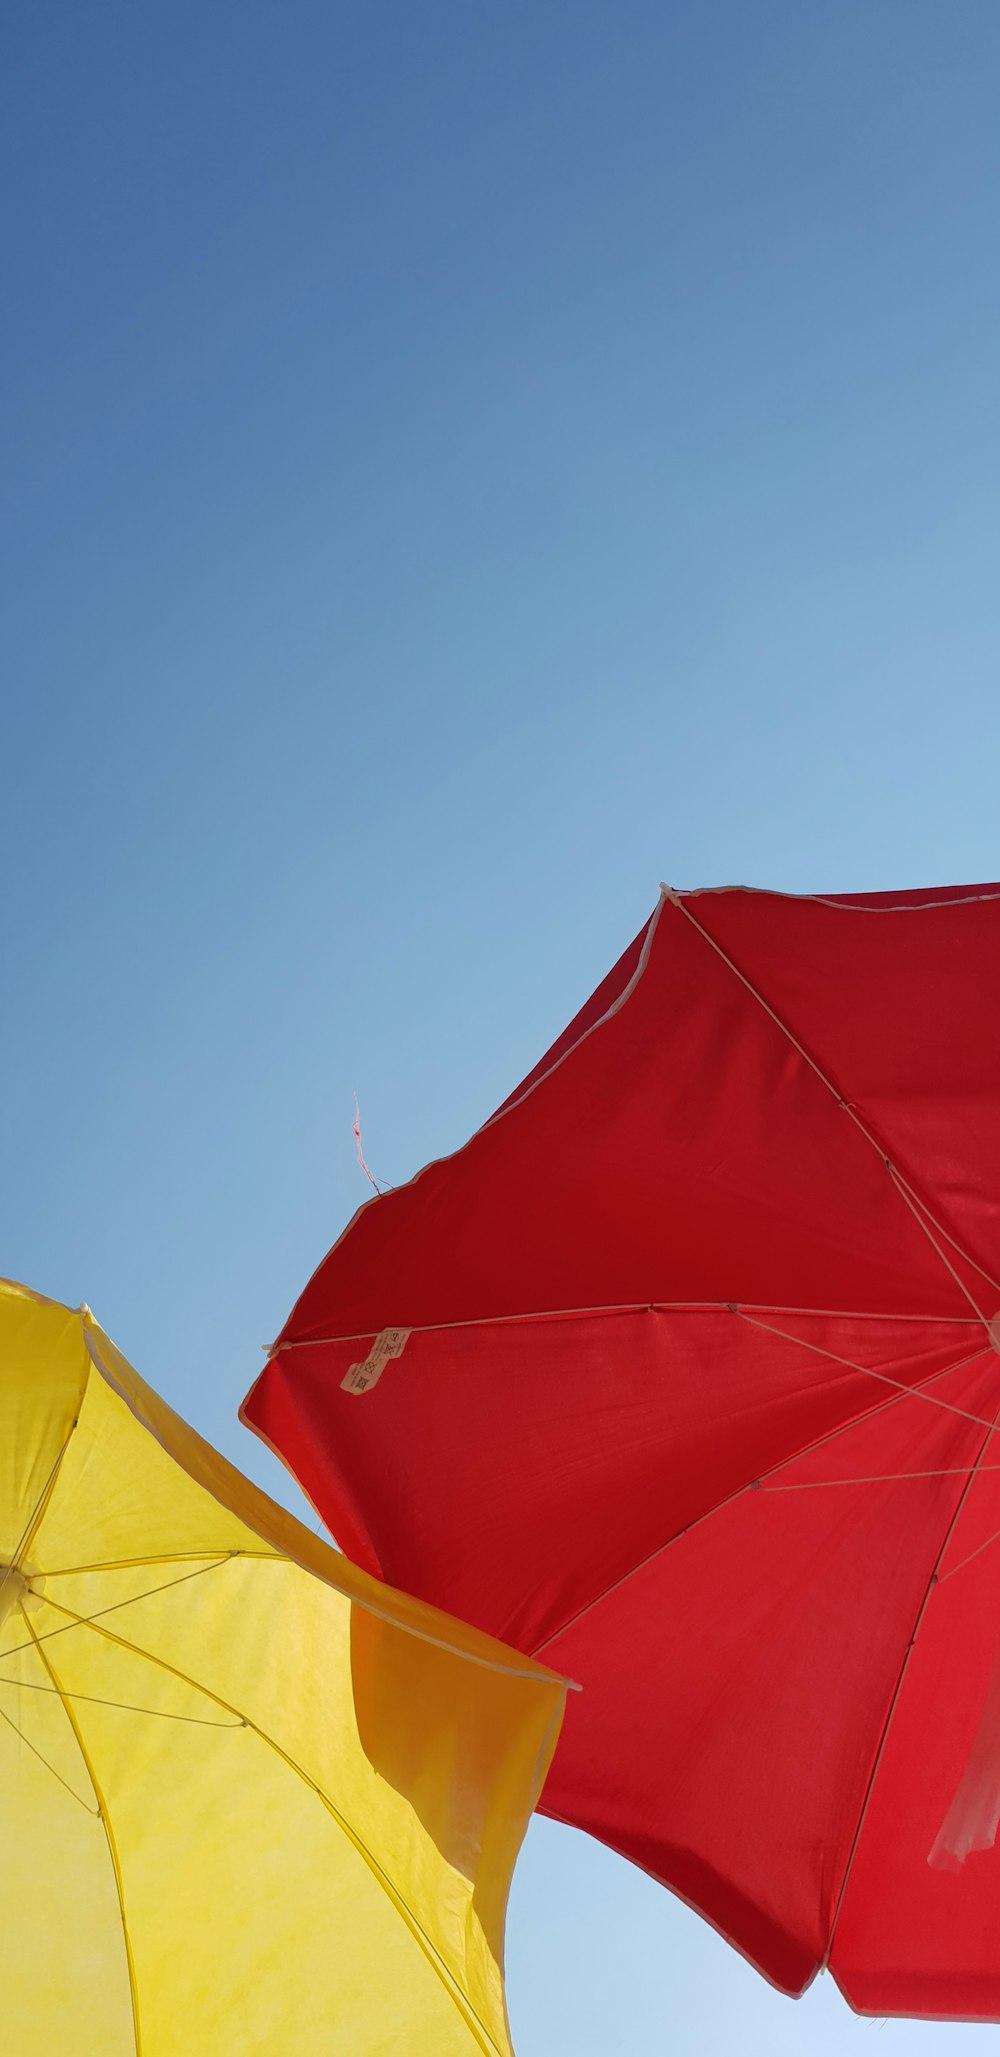 low angle photography of red umbrella